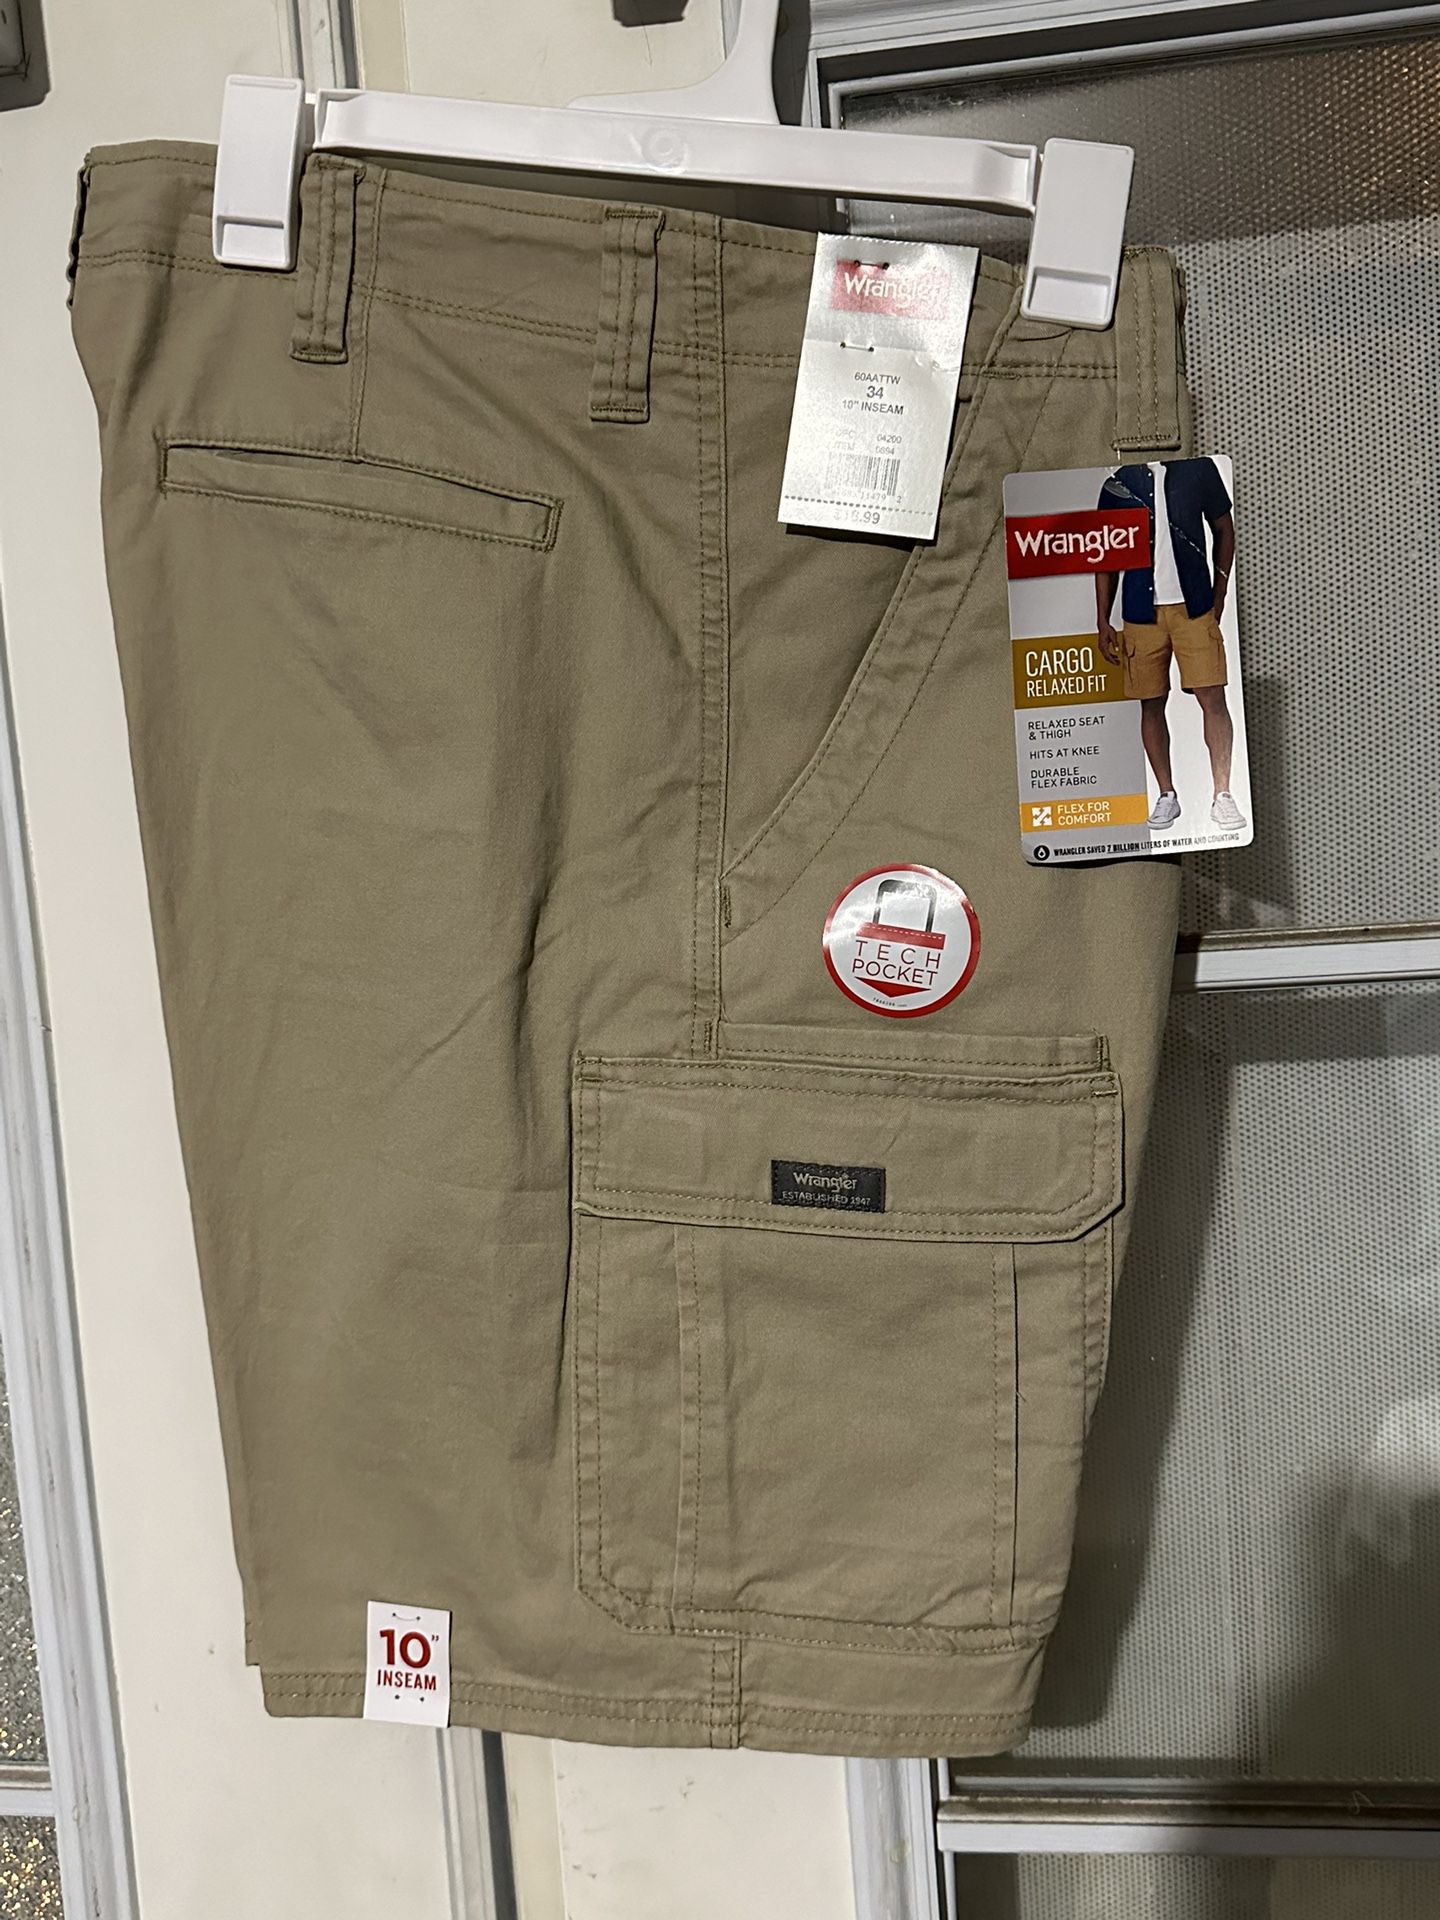 Tan Wrangler Cargo Shorts for Sale in Los Angeles, CA - OfferUp